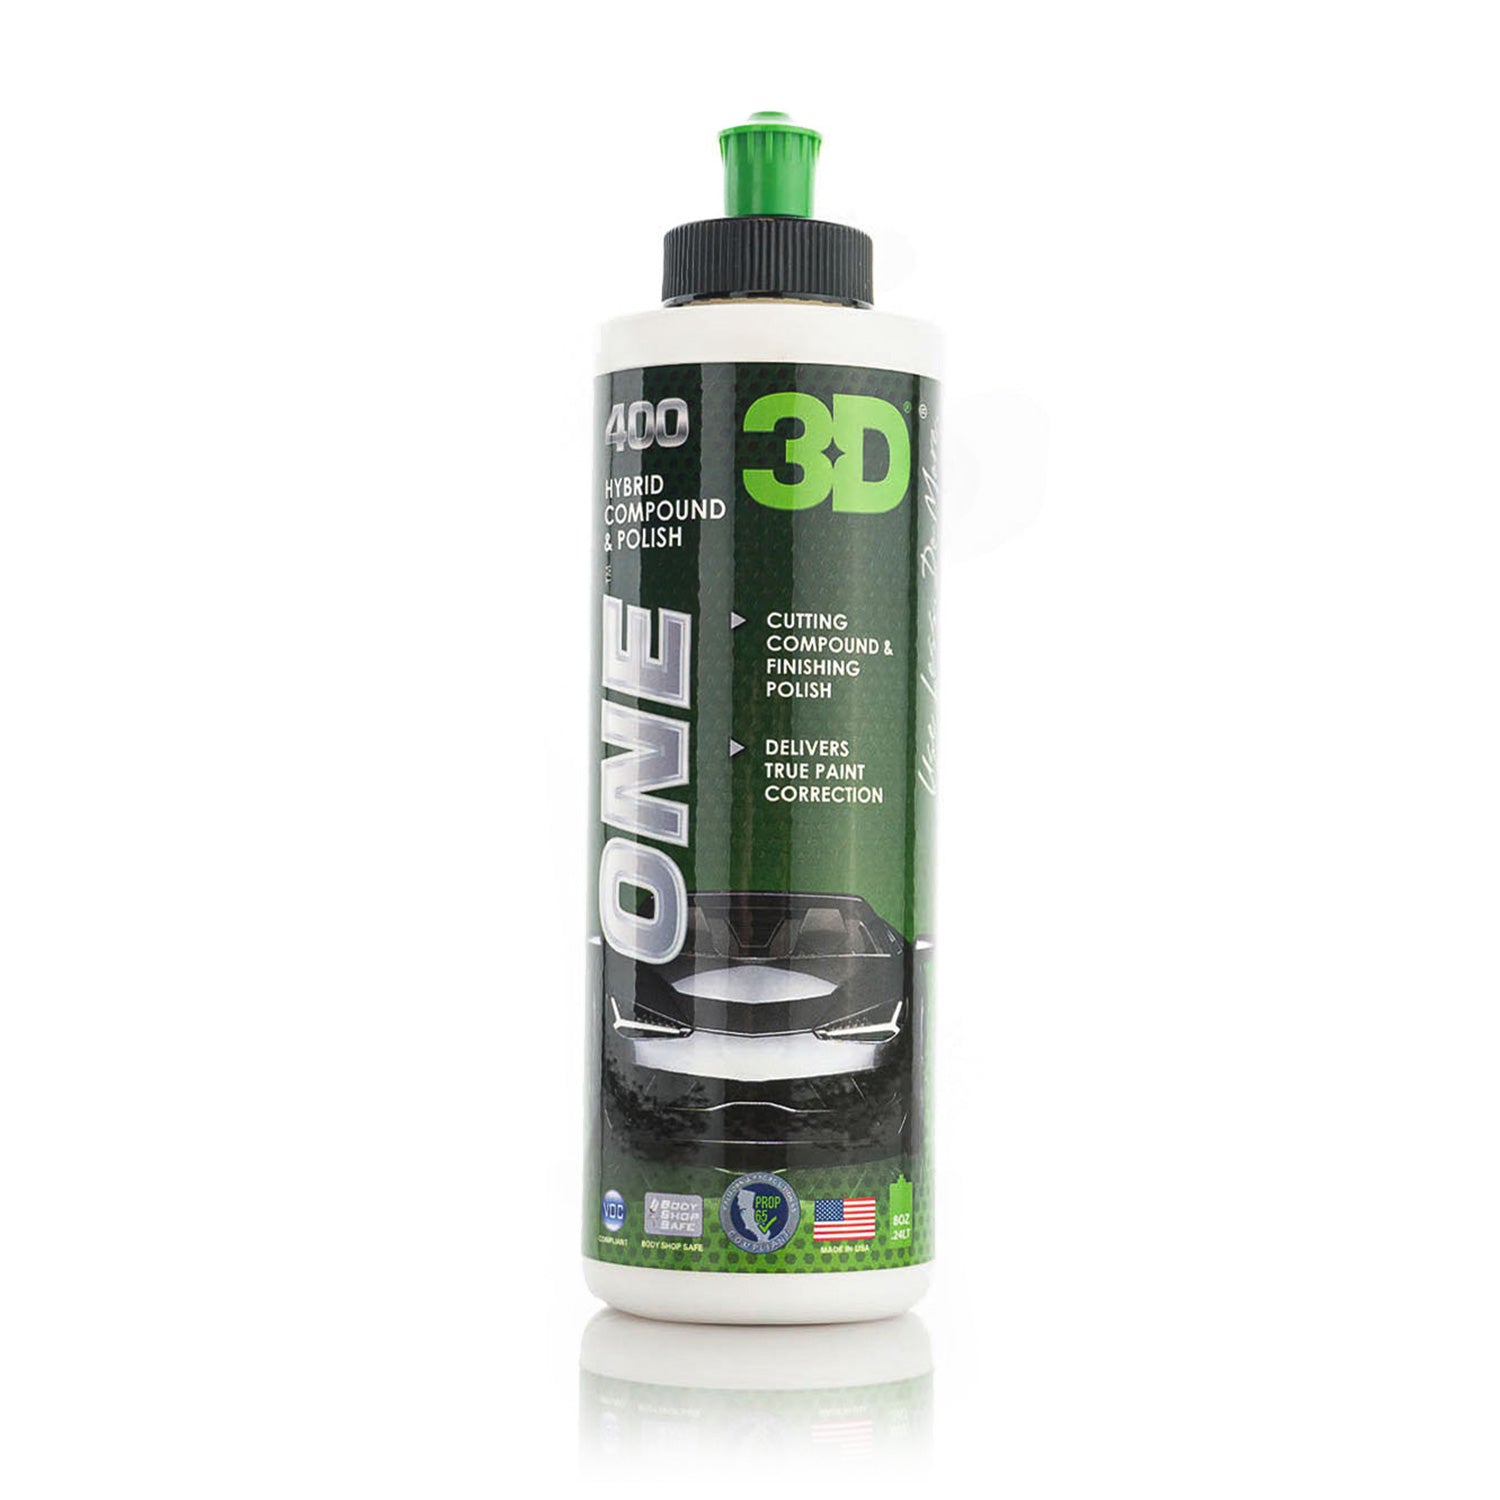 3d-car-care-one-step-cutting-compound-and-finishing-polish-8-ounces